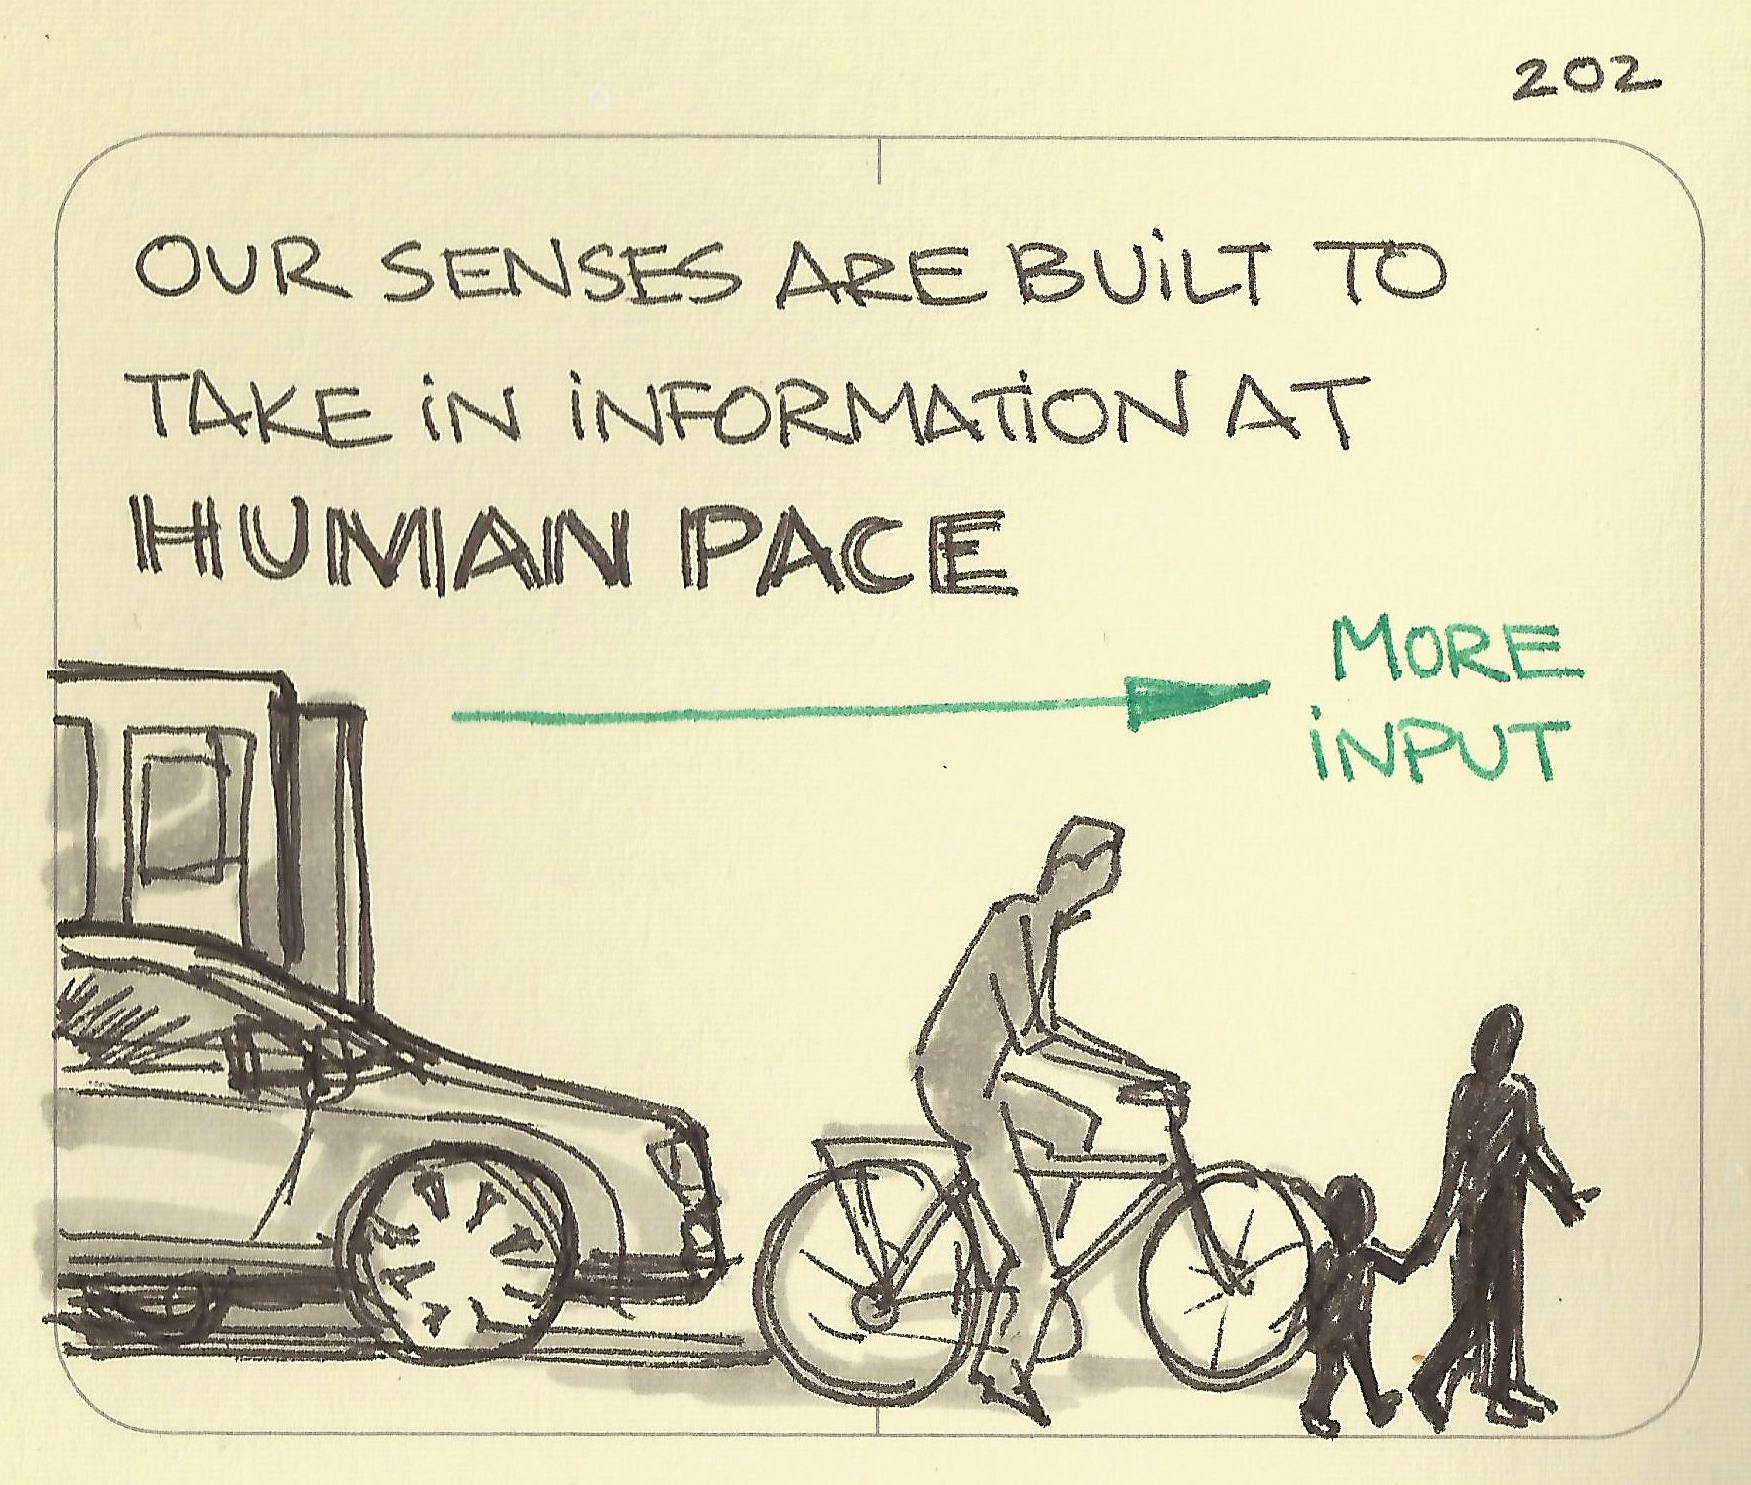 Our senses are built to take in information at human pace illustration showing more input as you go from cars and trains to bikes and walking